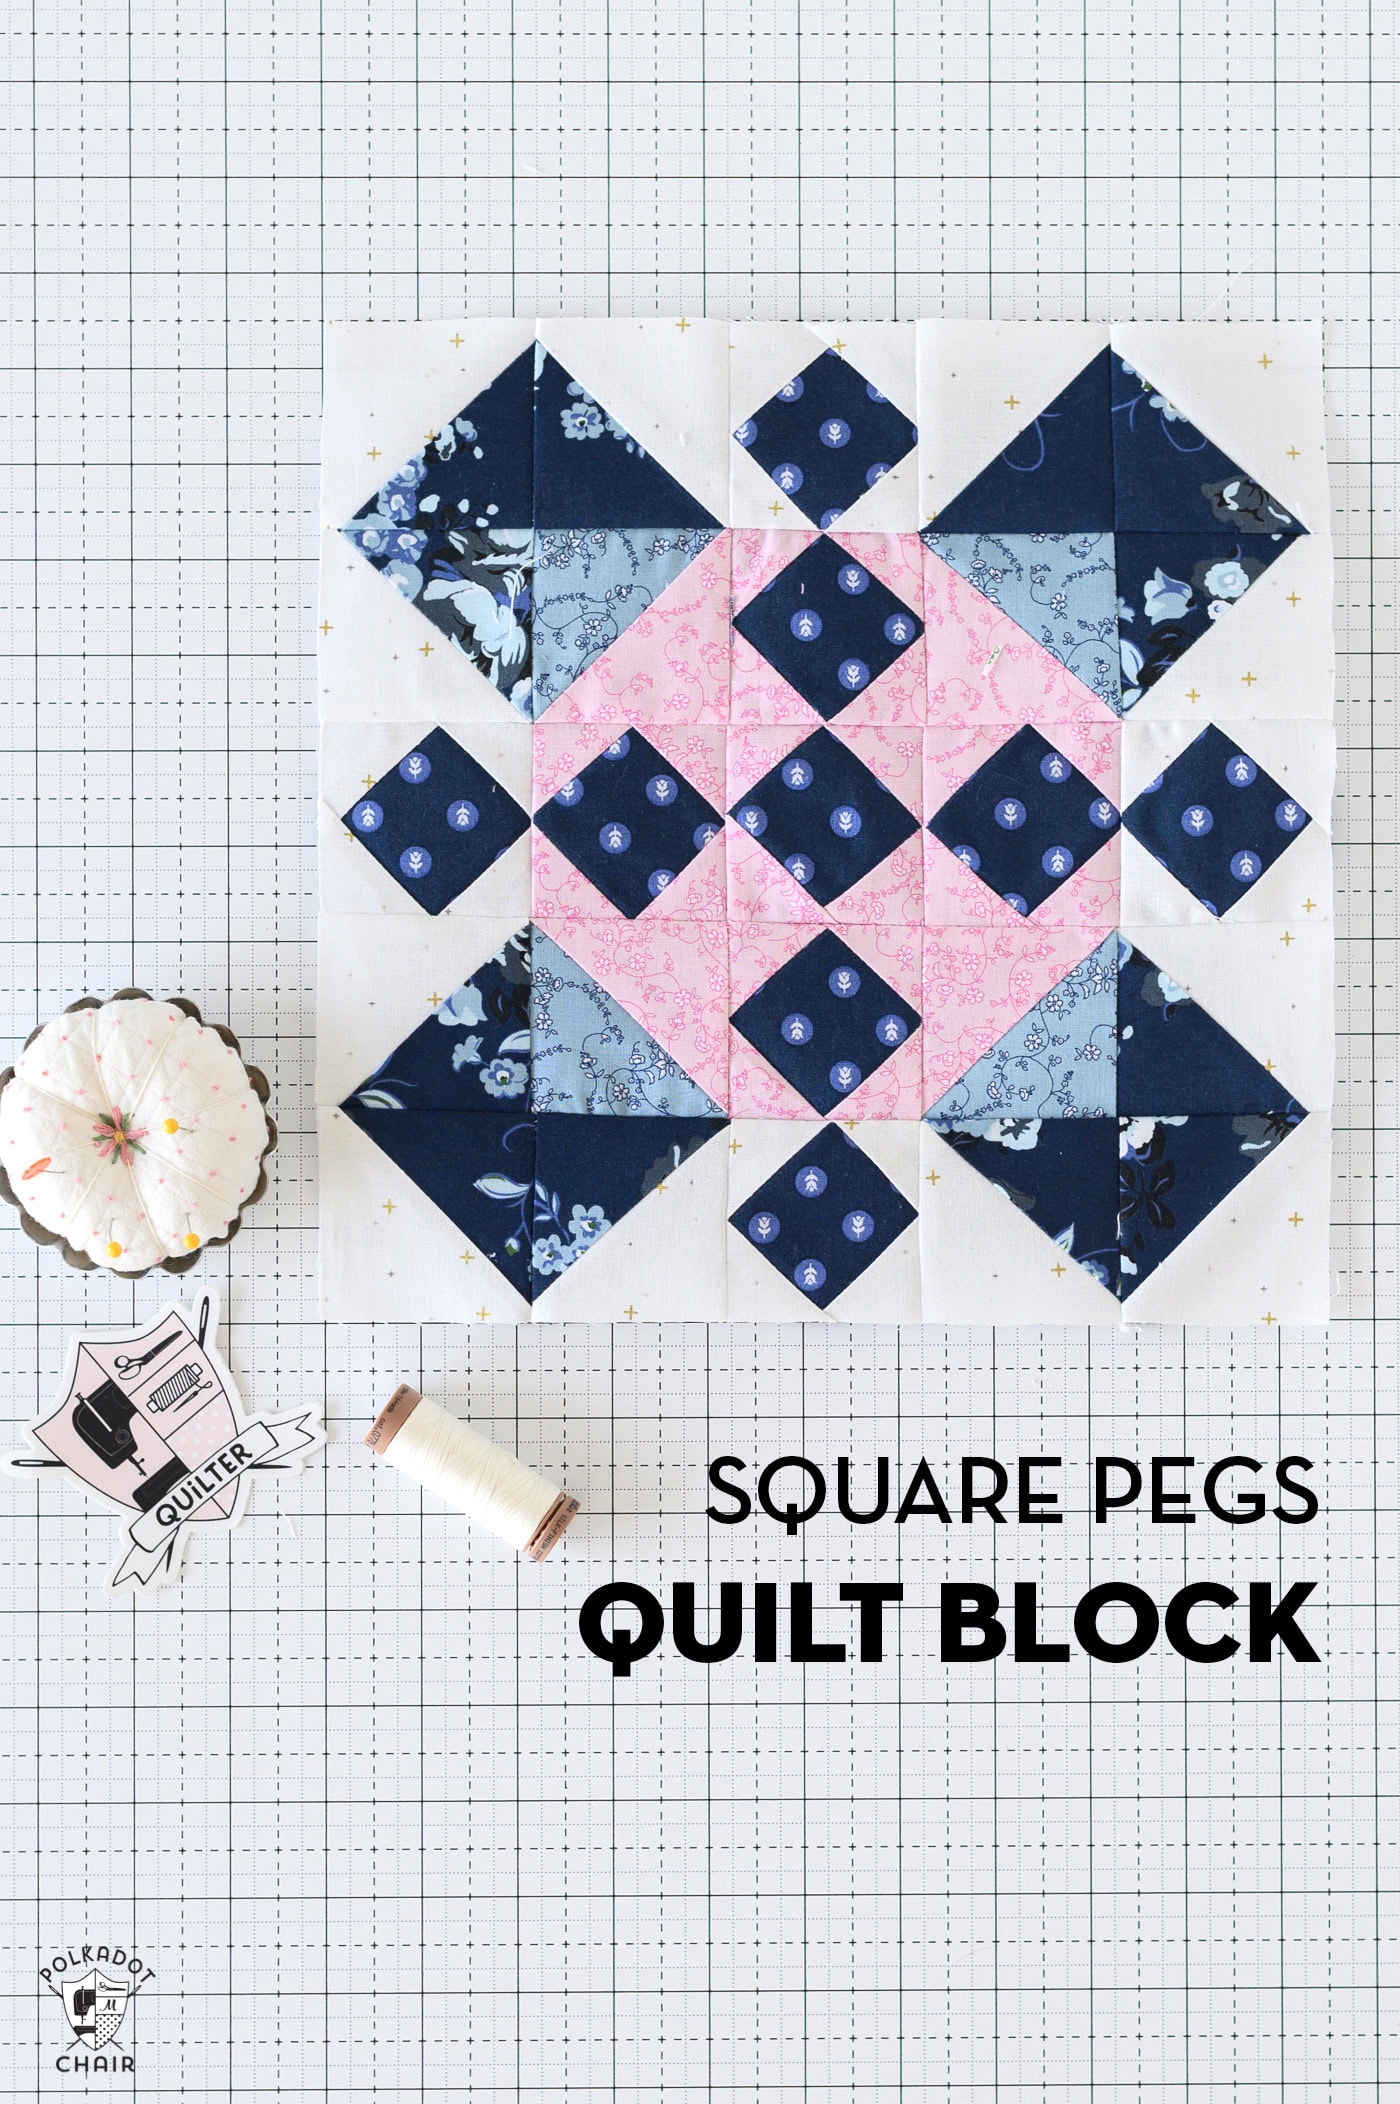 Square Pegs Quilt Block Pattern